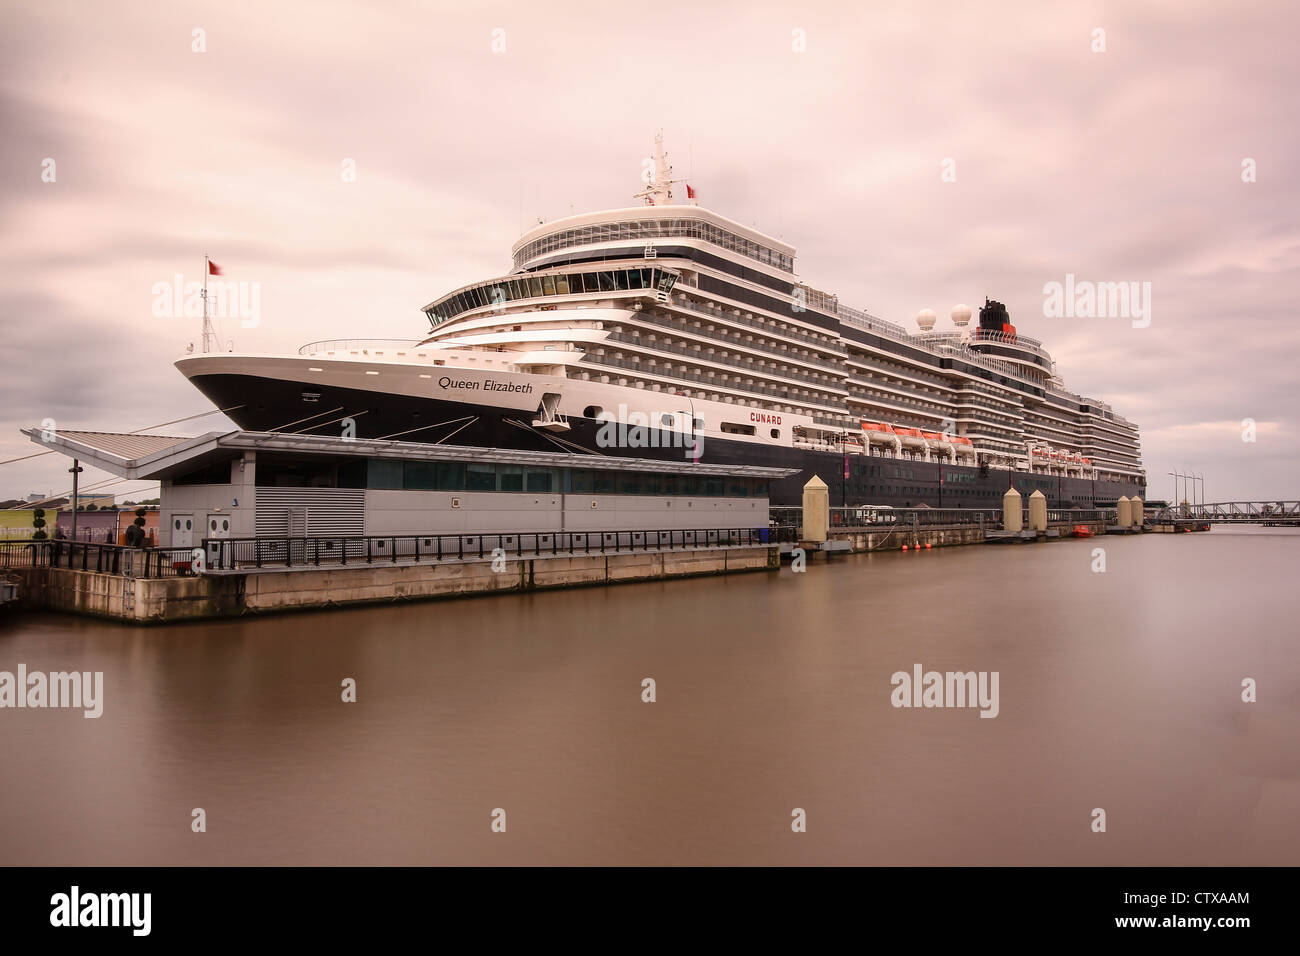 Queen Elizabeth docked at the cruise liner terminal in Liverpool. Stock Photo